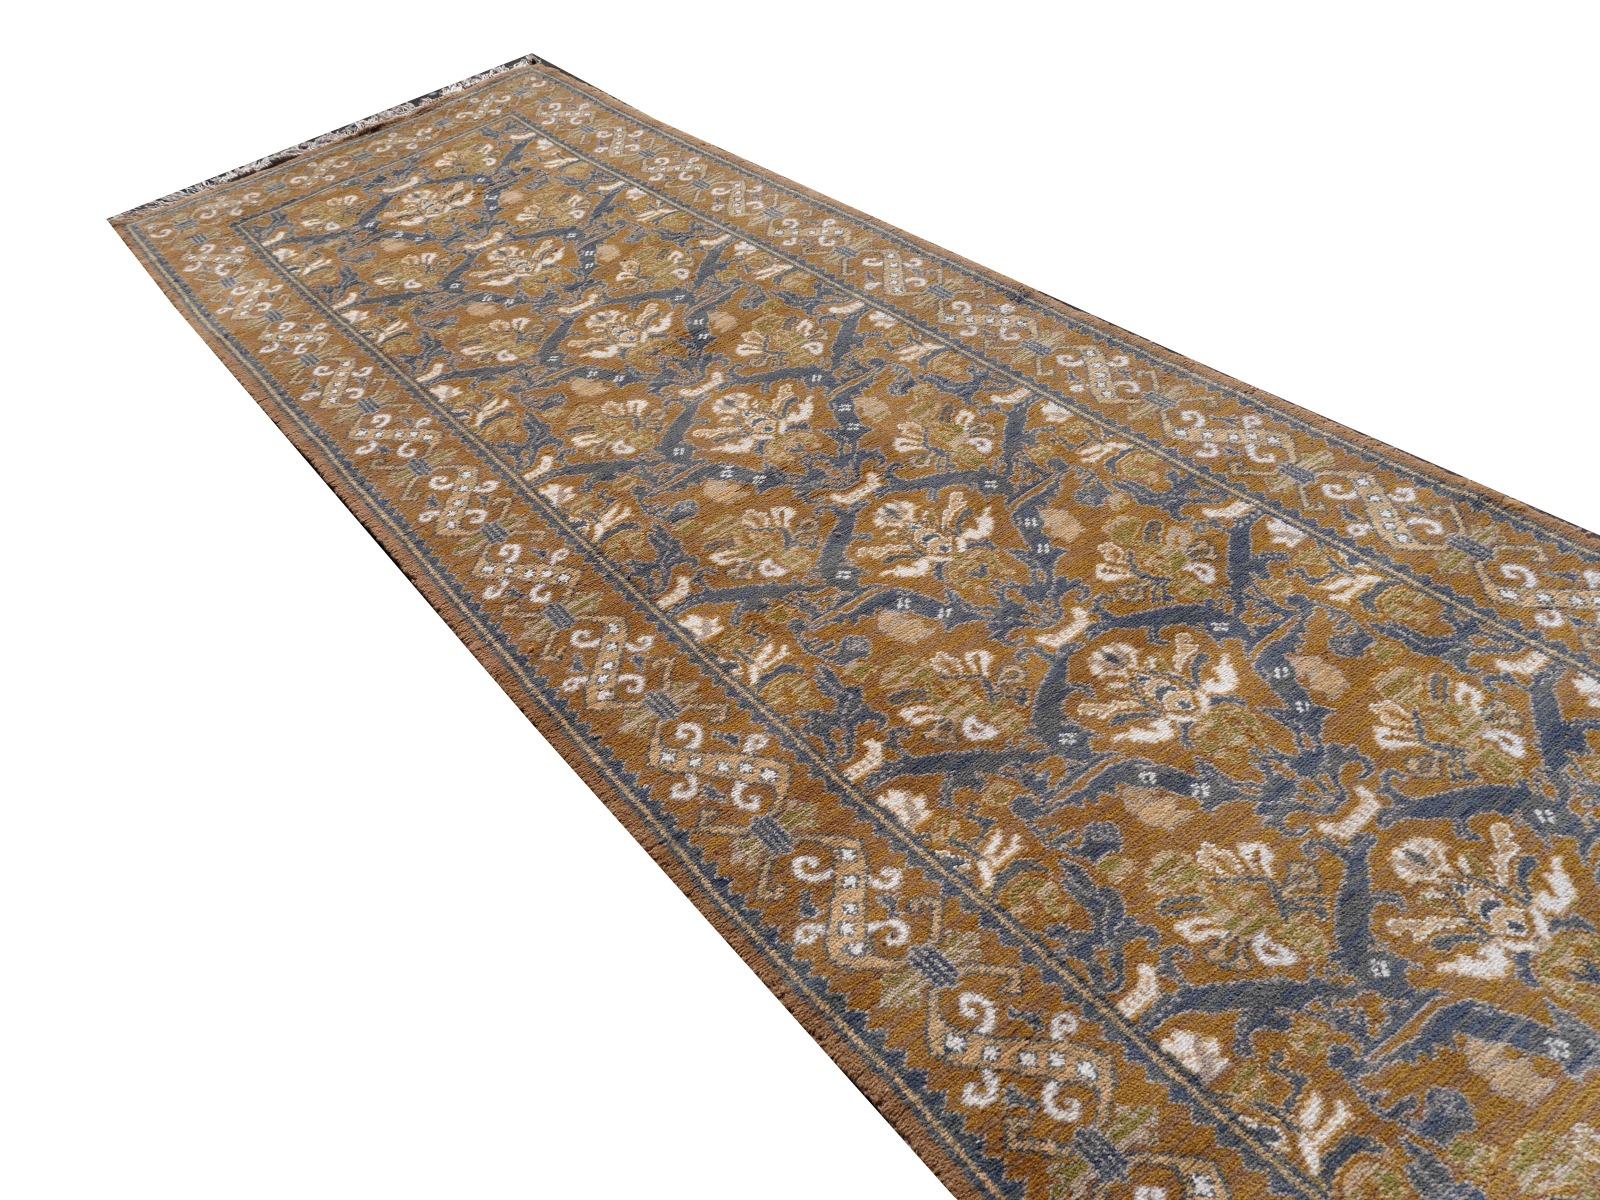 Stunning stairway or hallway runner wool rug, hand-knotted in Spain
Size: approx. 22.7 x 4.3 ft, 272 x 51 inch or 690 x 130 cm

Spanish design rugs and carpets are mainly made of fine wool.
This wonderful and stunning example comes from